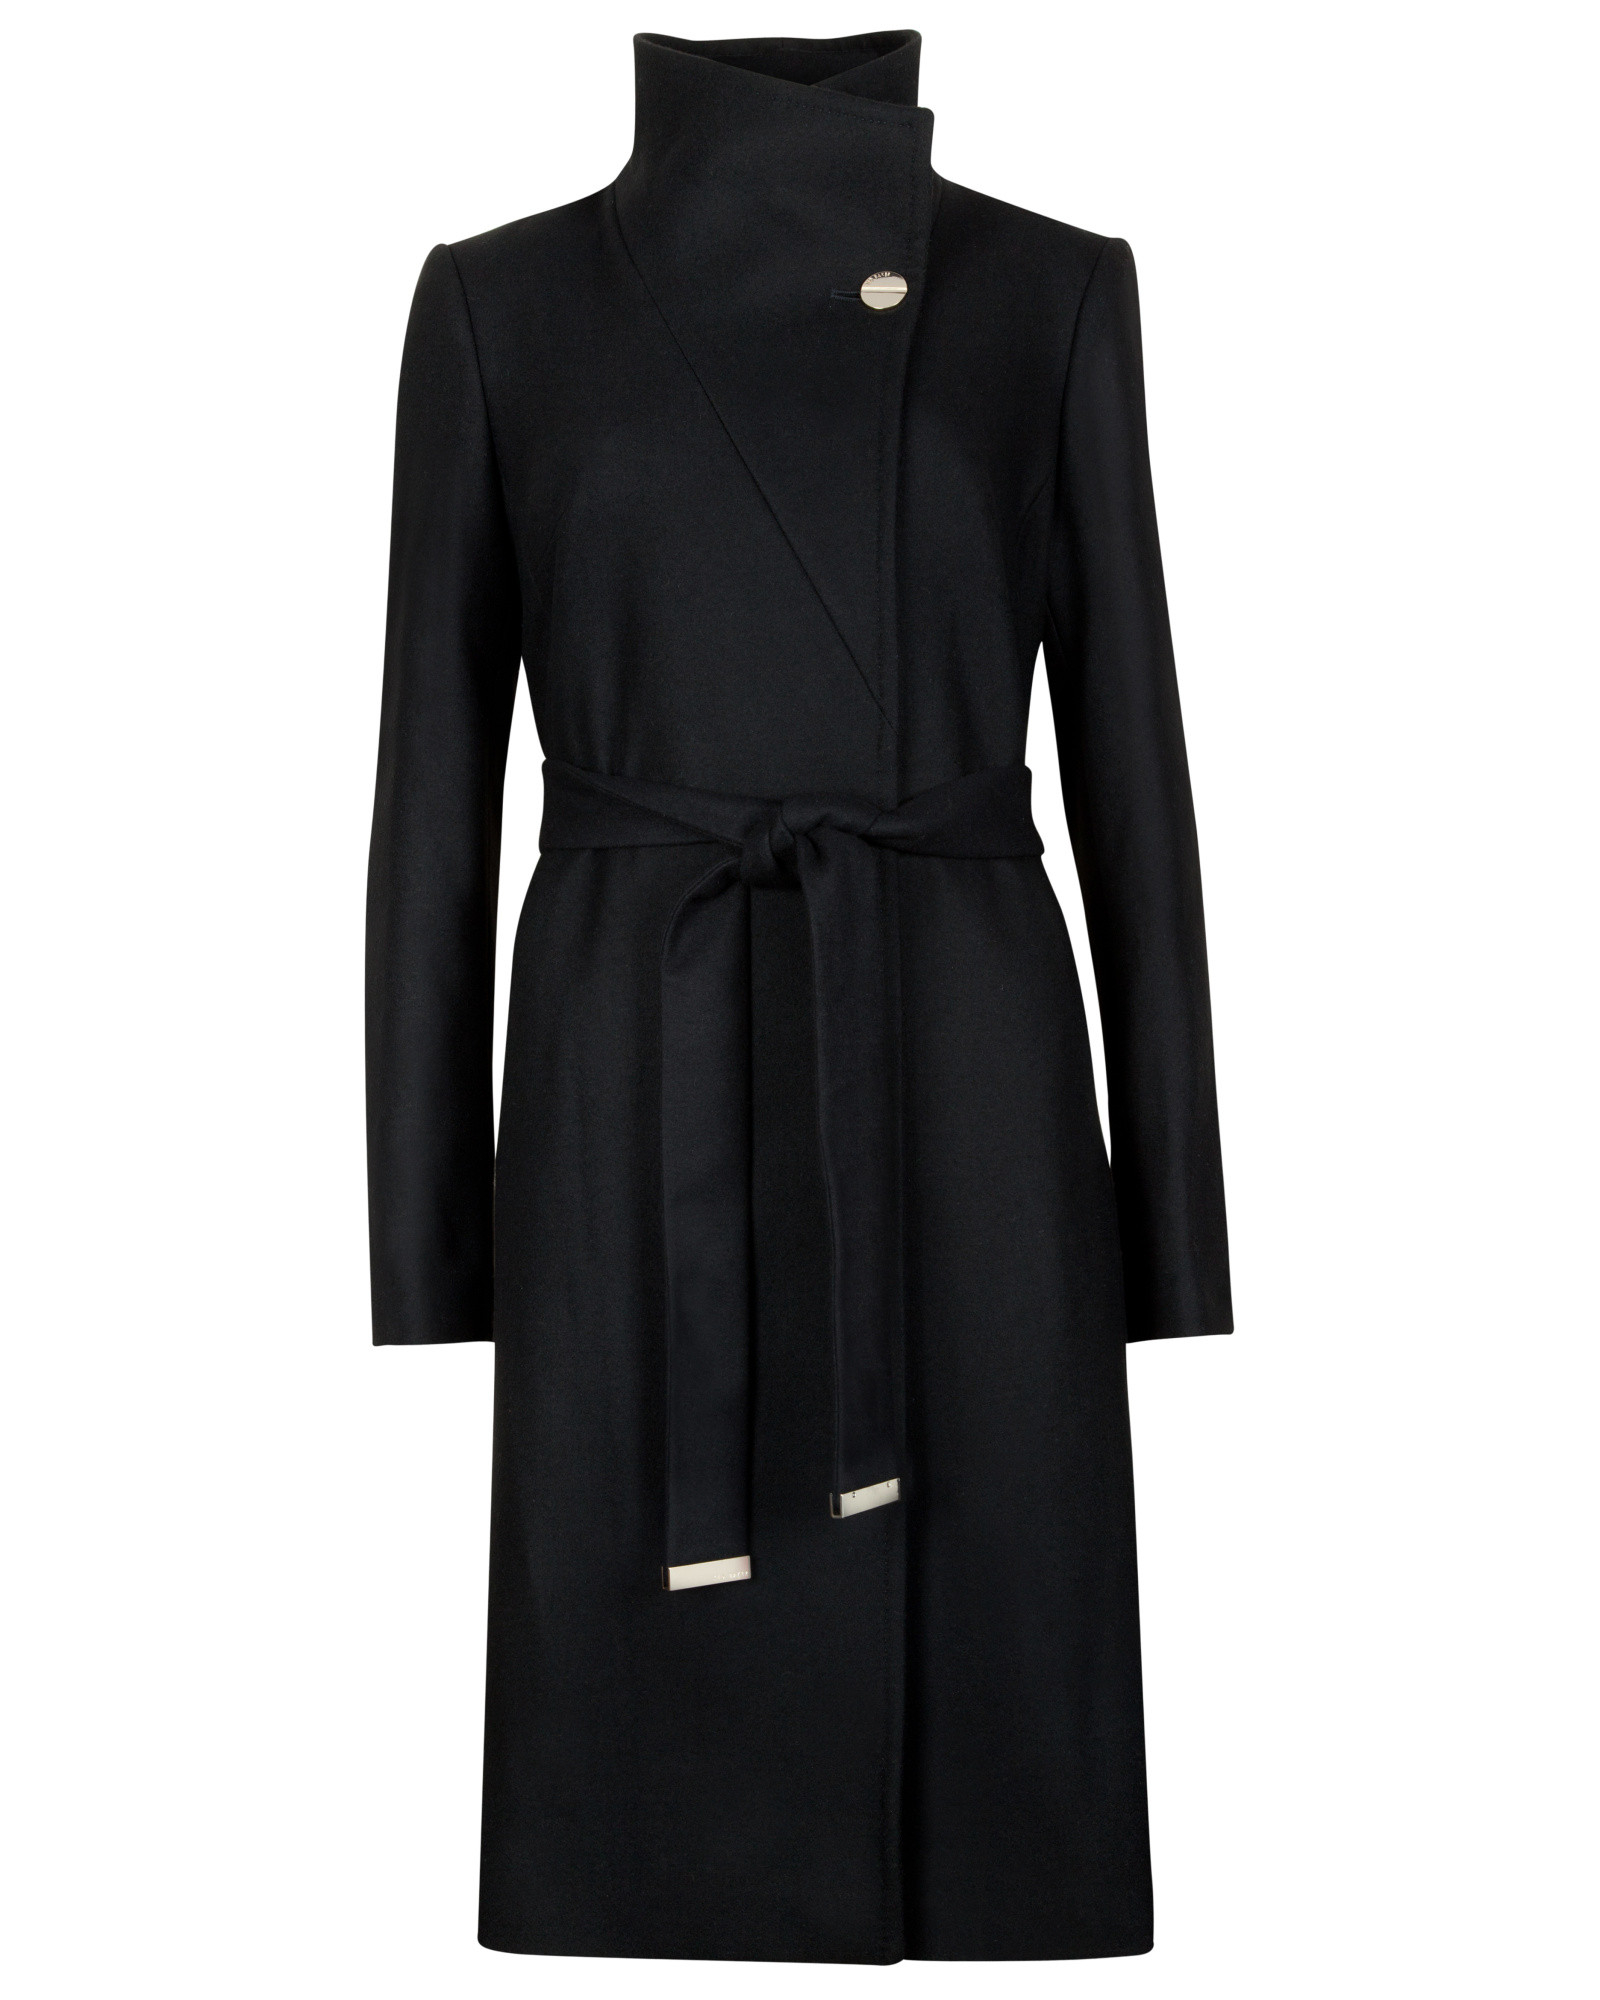 Lyst - Ted Baker Nevia Belted Wrap Coat in Black